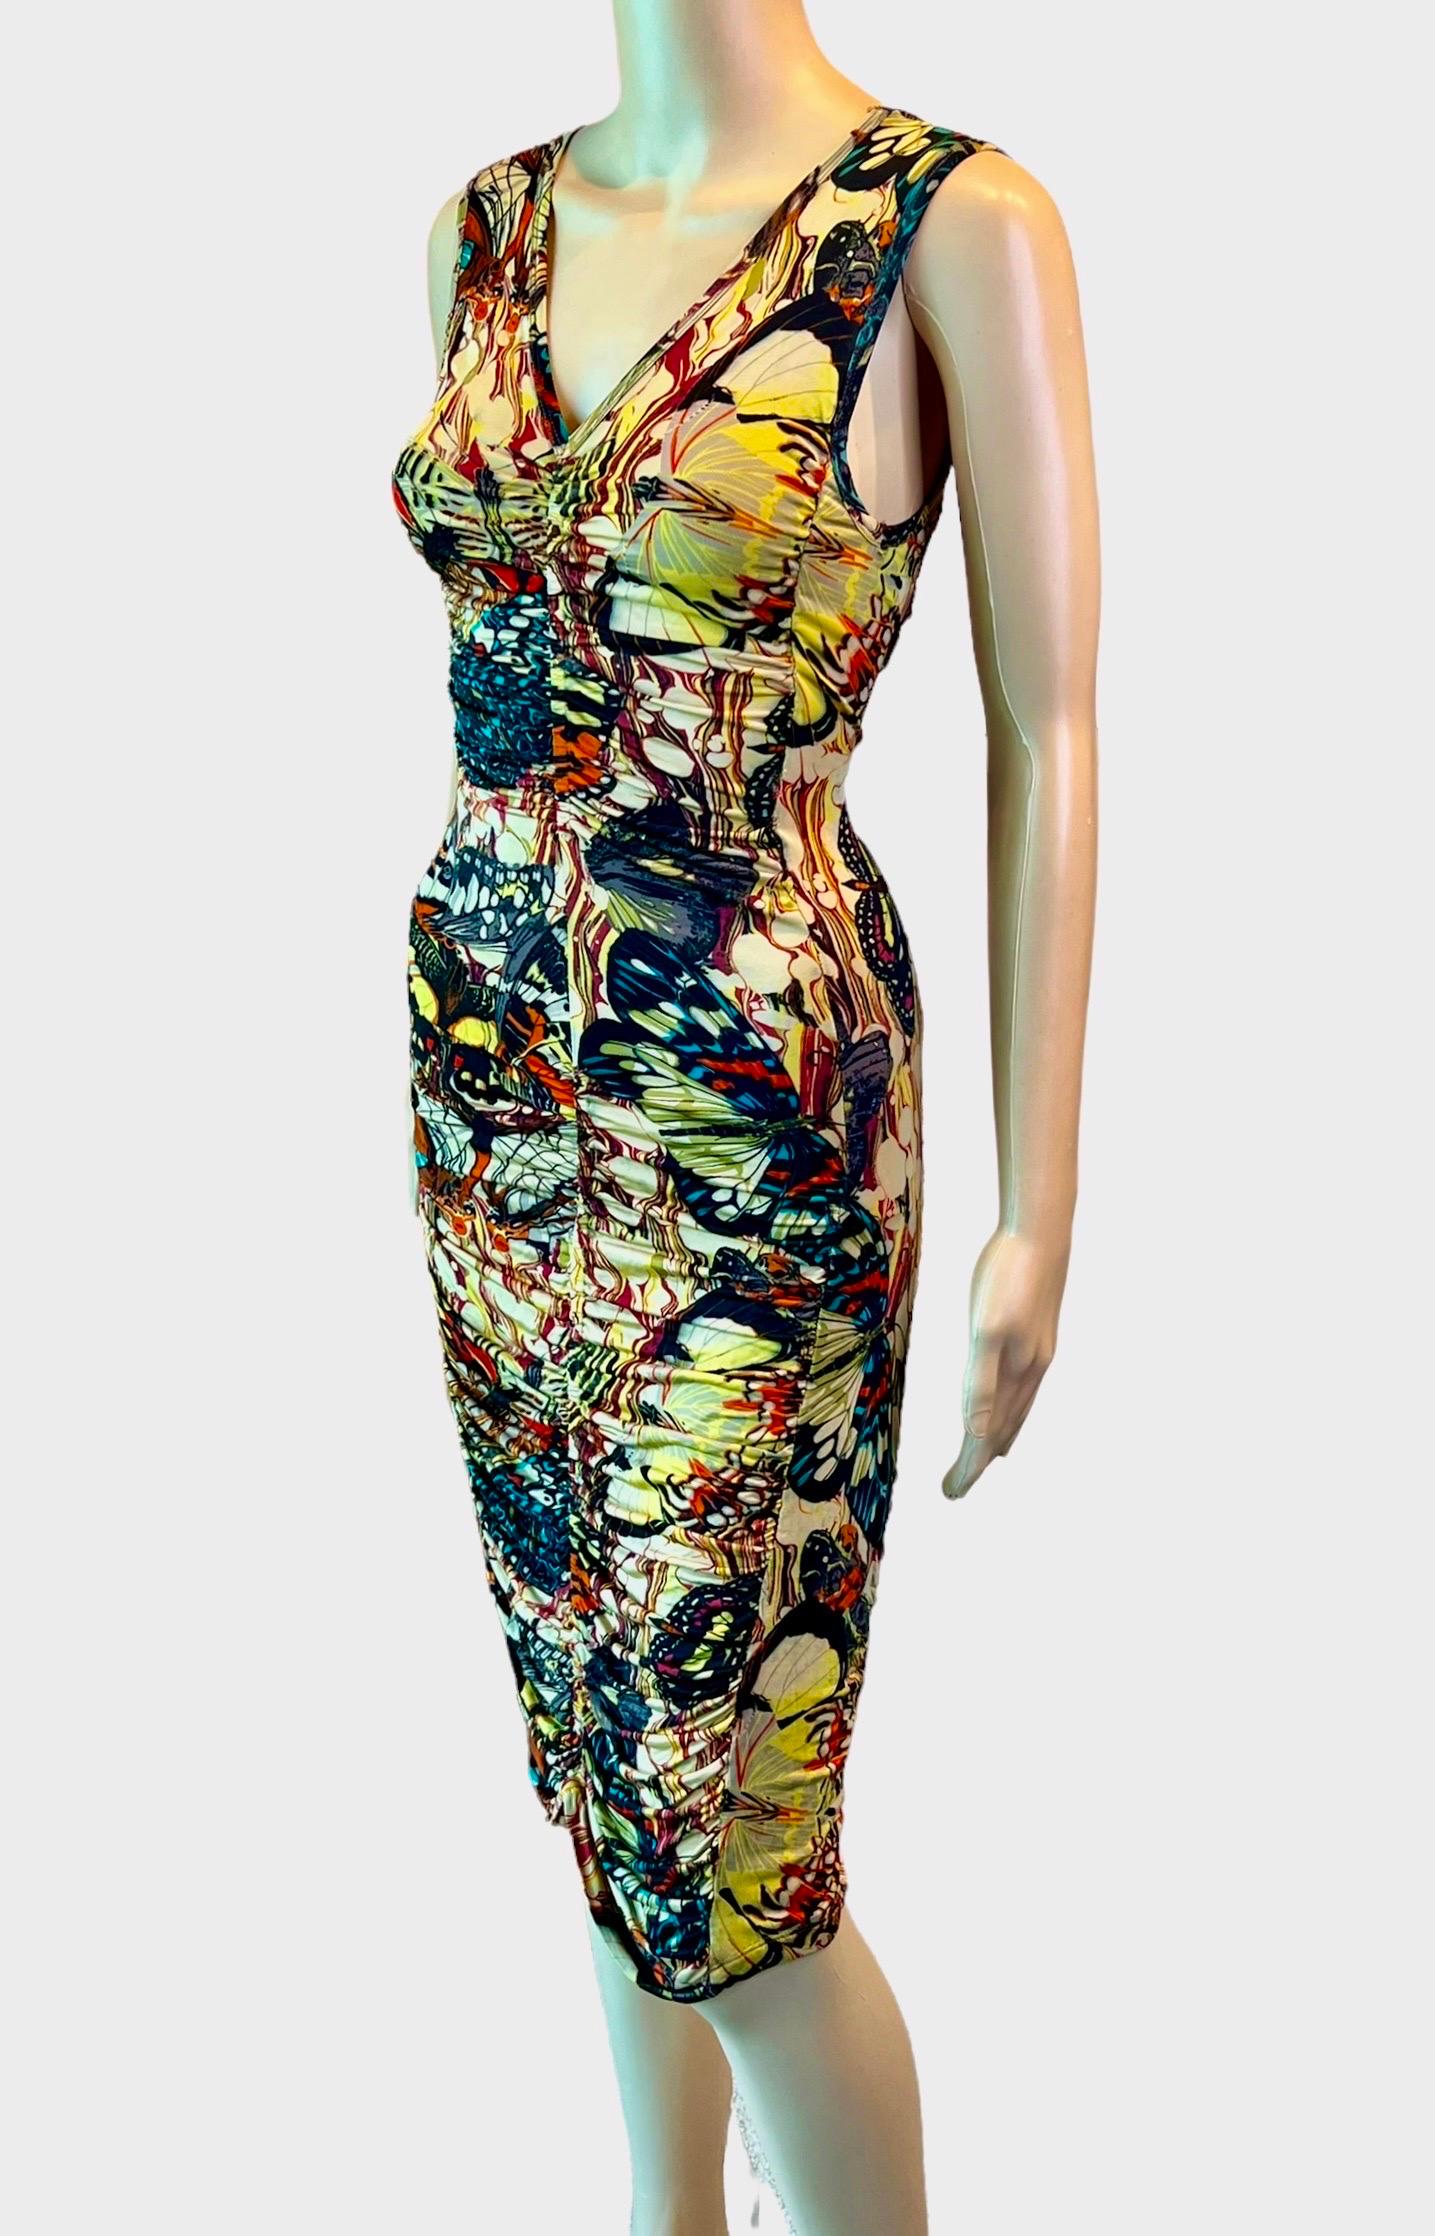 Jean Paul Gaultier Soleil S/S 2003 Butterfly Print Ruched Bodycon Mini Dress Size M